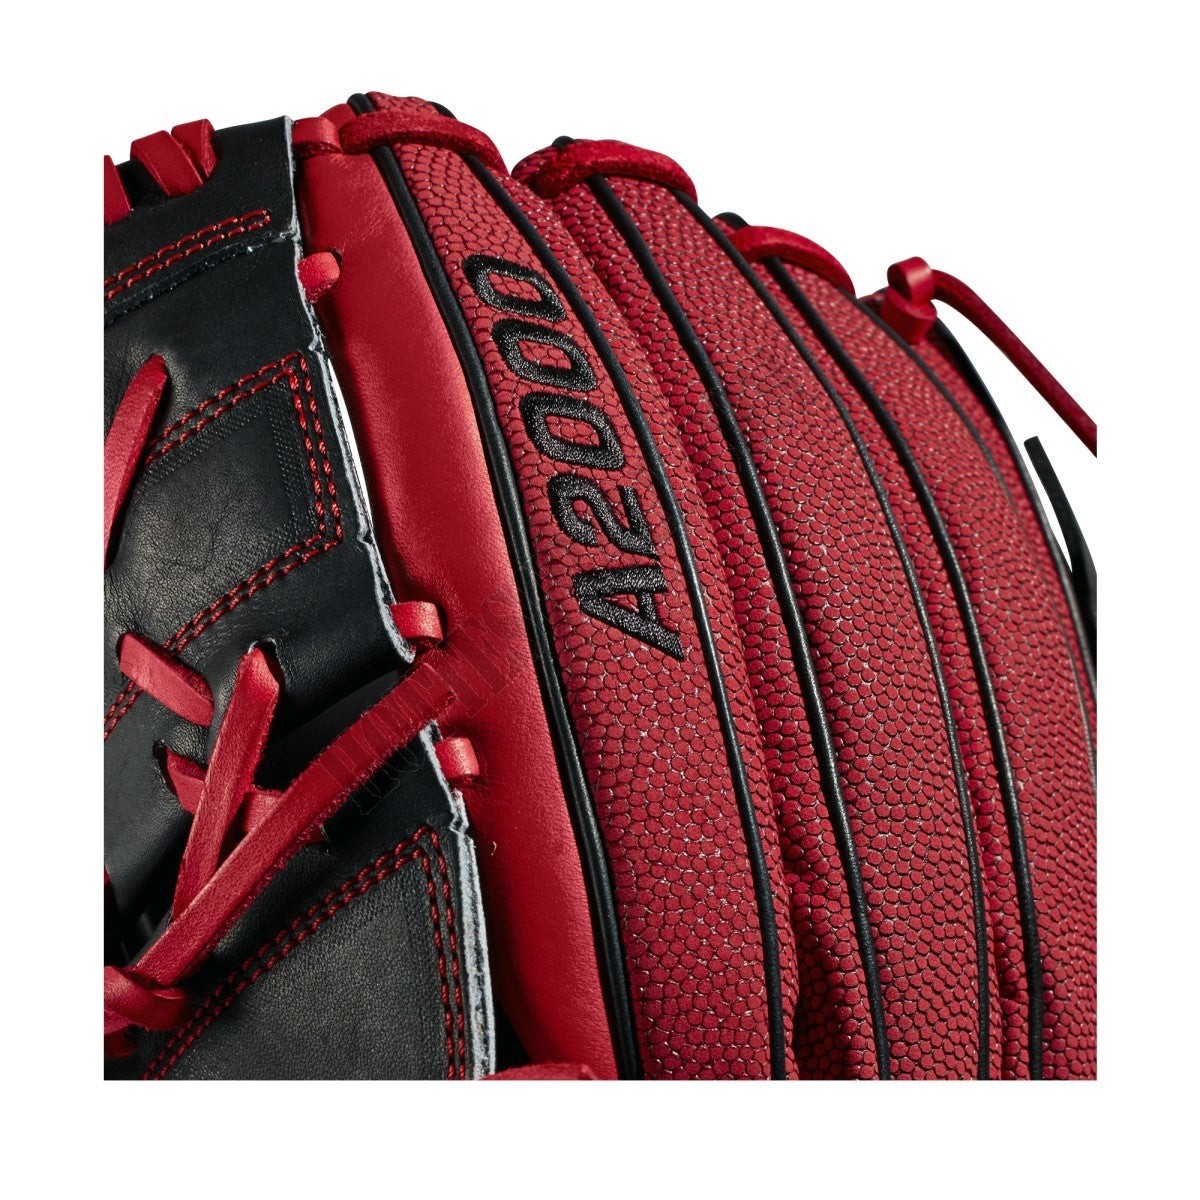 2018 A2000 MA14 SuperSkin GM 12.25" Pitcher's Fastpitch Glove - Left Hand Throw ● Wilson Promotions - -4